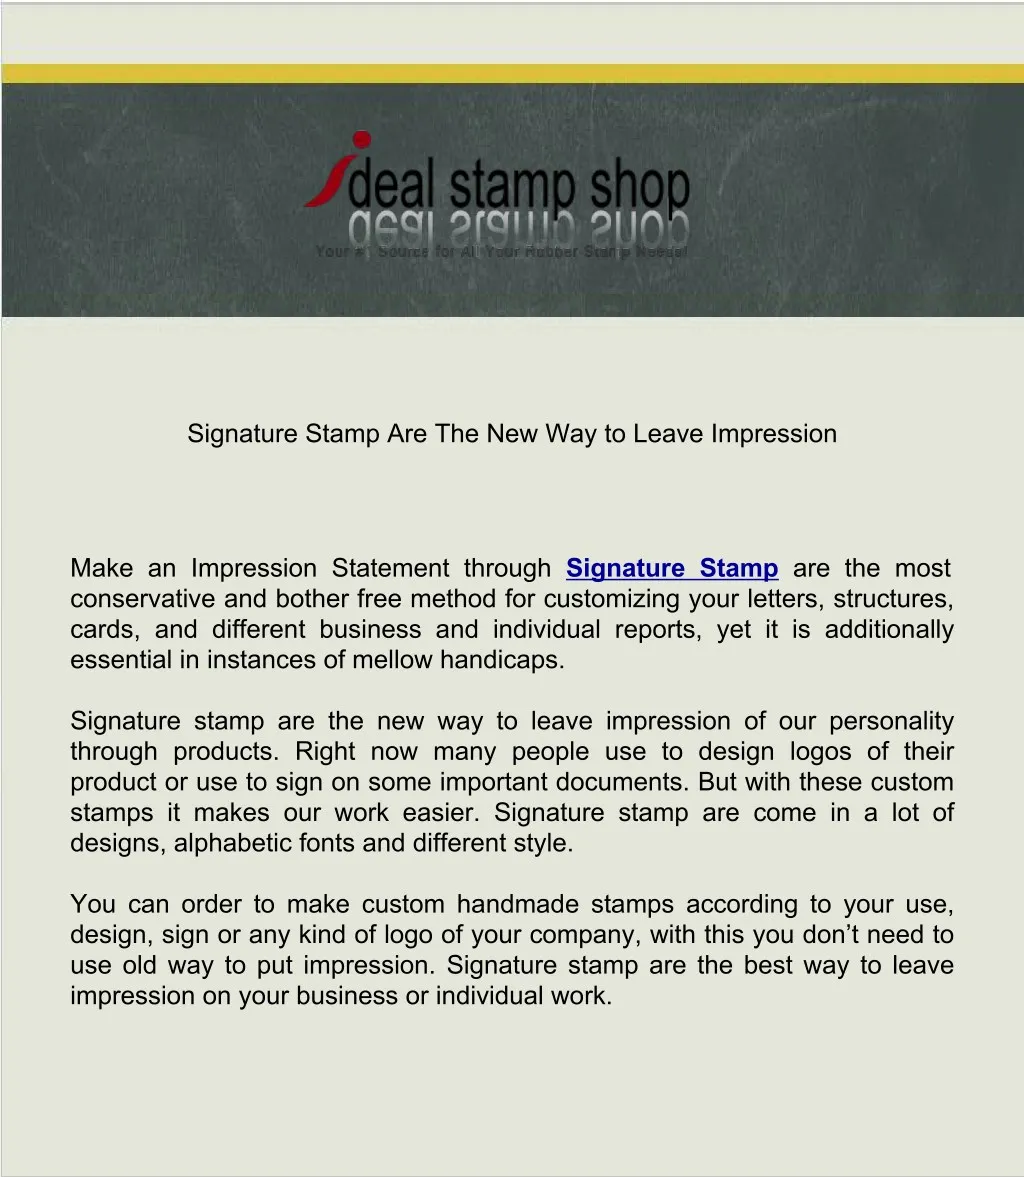 signature stamp are the new way to leave